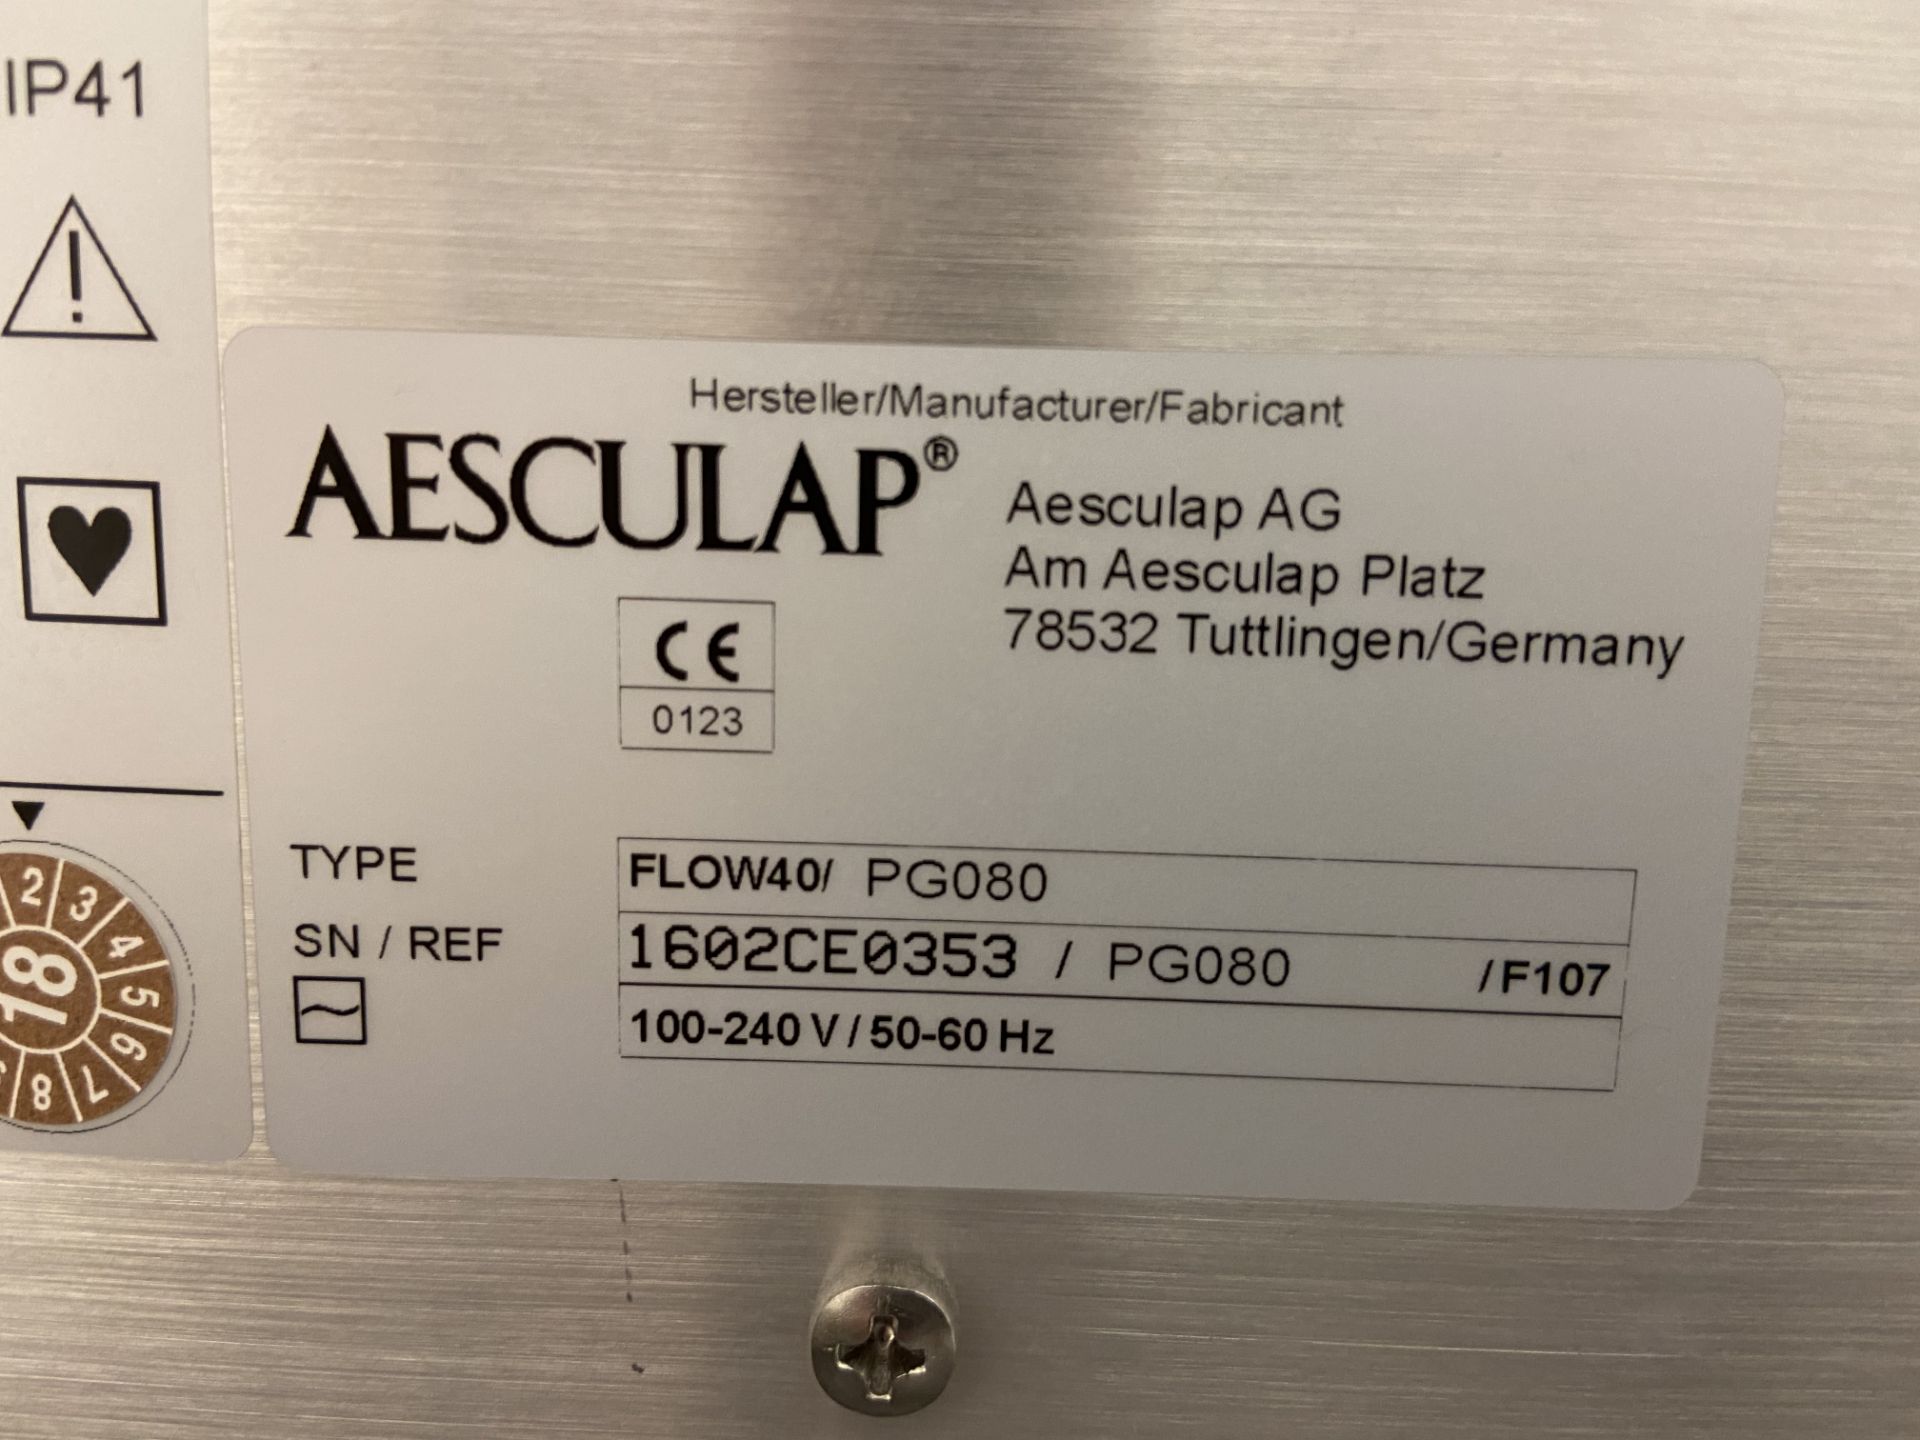 Aesculap Flow 40 high flow insufflator, S/No 1602CE0353/PG08- in Small Animal Clinic Operating - Image 2 of 2